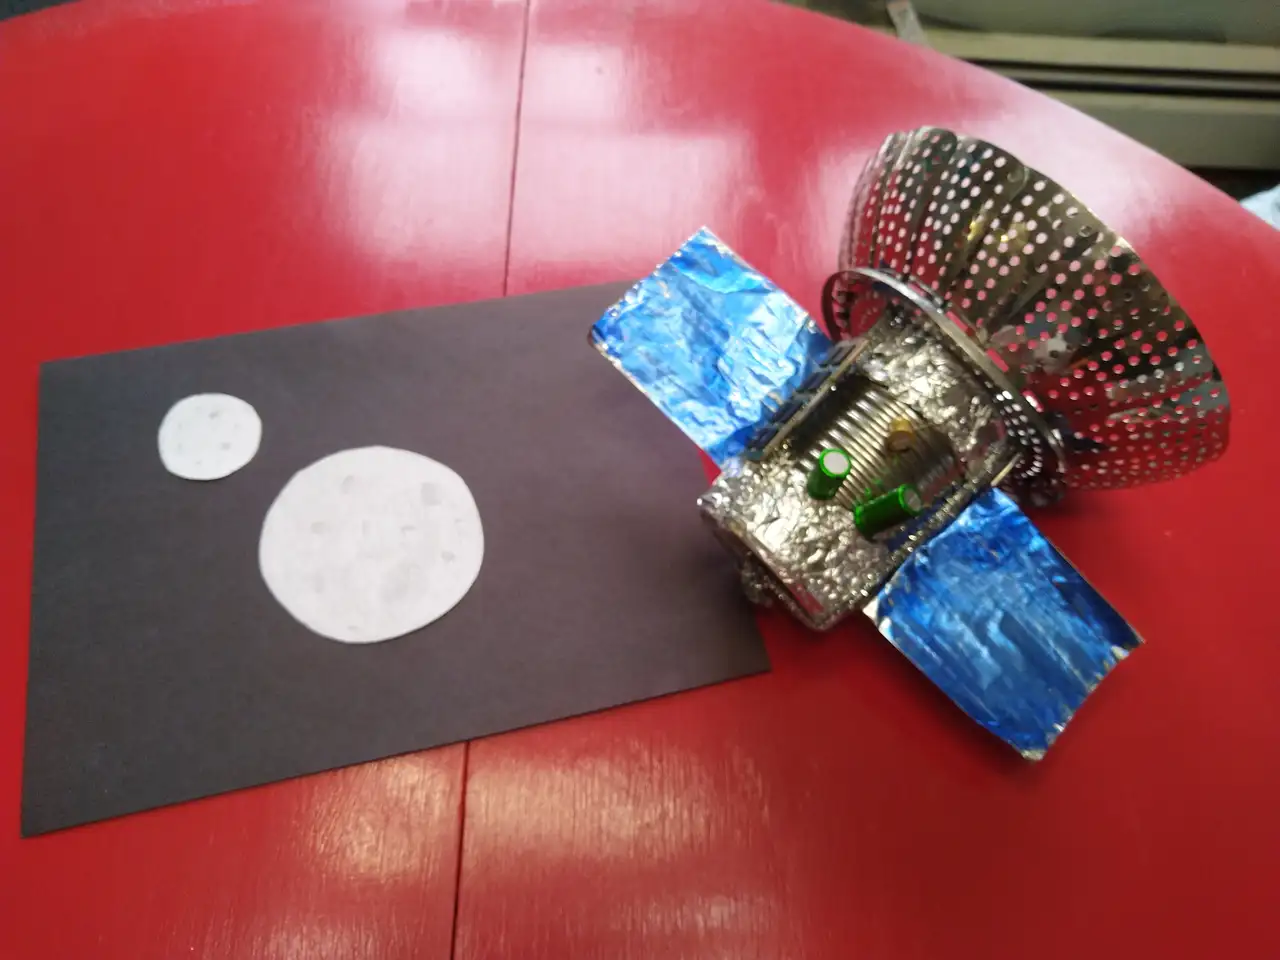 A simple sculpture resembling a satellite, constructed from a metal can, aluminum foil, a vegetable steamer basket, and miscellaneous electronic components. Next to the sculpture are two circles of white paper on a black sheet of paper, resembling two planets or moons in space.